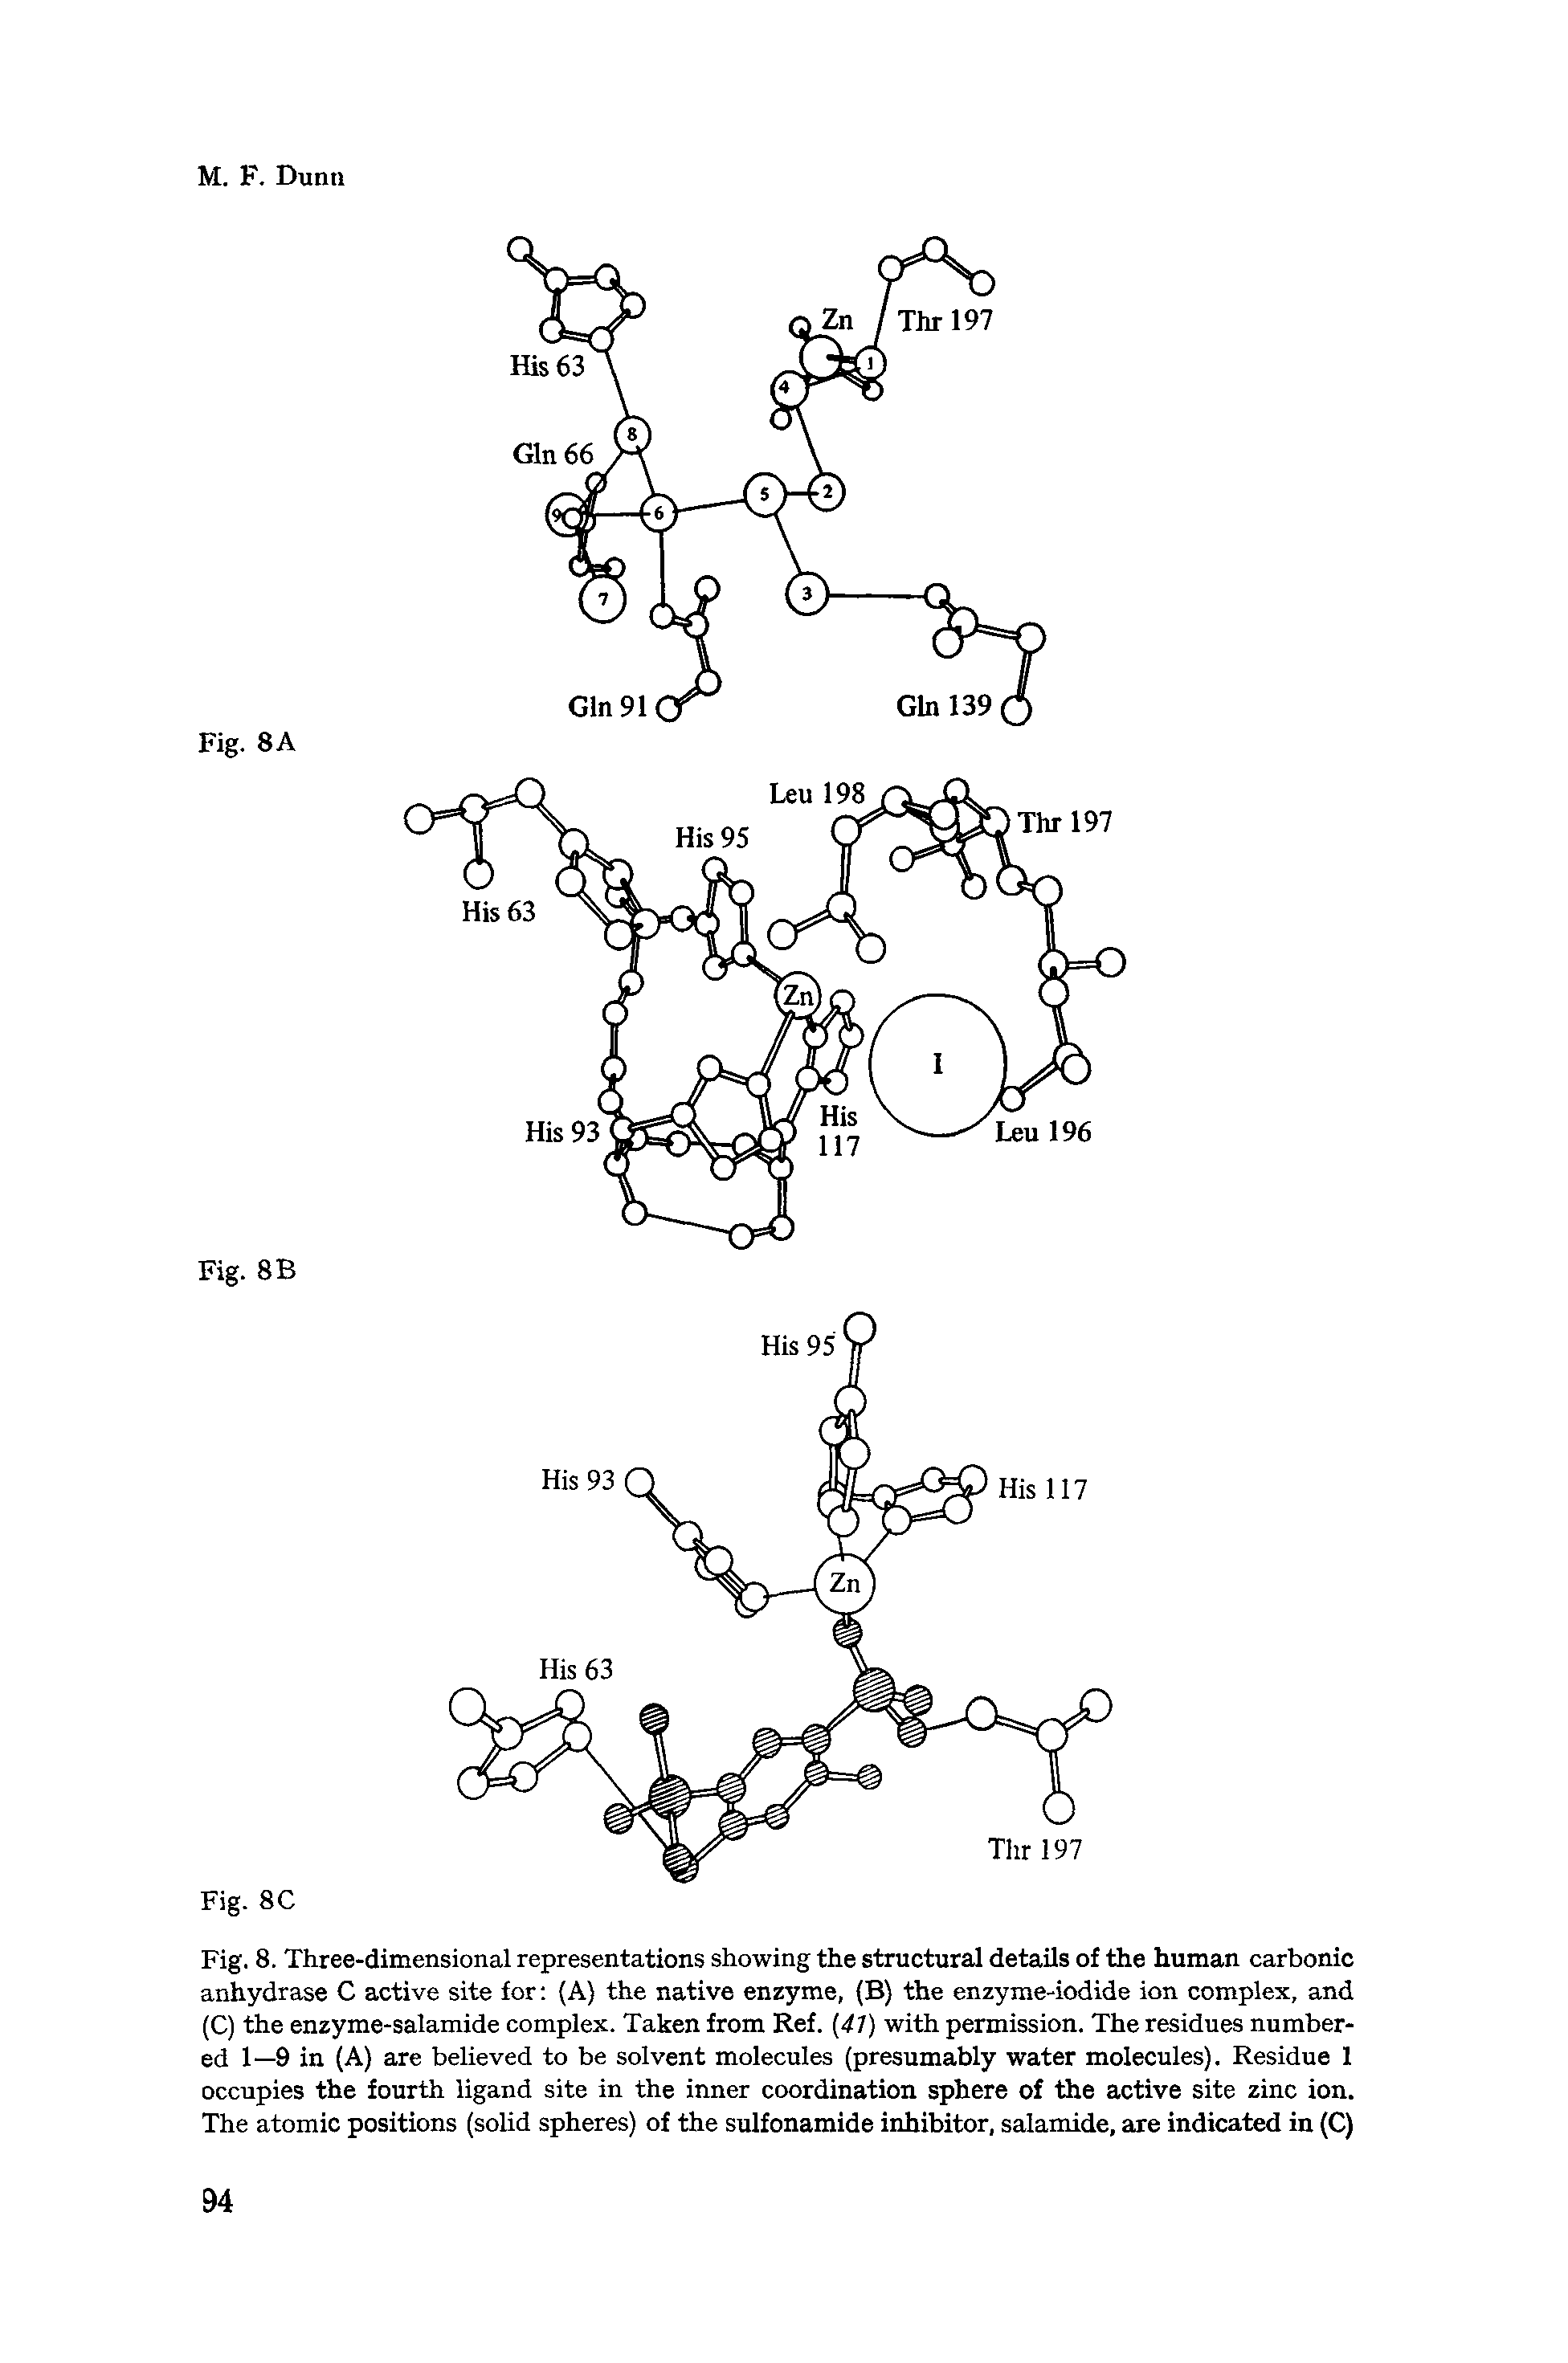 Fig. 8. Three-dimensional representations showing the structural details of the human carbonic anhydrase C active site for (A) the native enzyme, (B) the enzyme-iodide ion complex, and (C) the enzyme-salamide complex. Taken from Ref. (47) with permission. The residues numbered 1—9 in (A) are believed to be solvent molecules (presumably water molecules). Residue 1 occupies the fourth ligand site in the inner coordination sphere of the active site zinc ion. The atomic positions (solid spheres) of the sulfonamide inhibitor, salamide, are indicated in (C)...